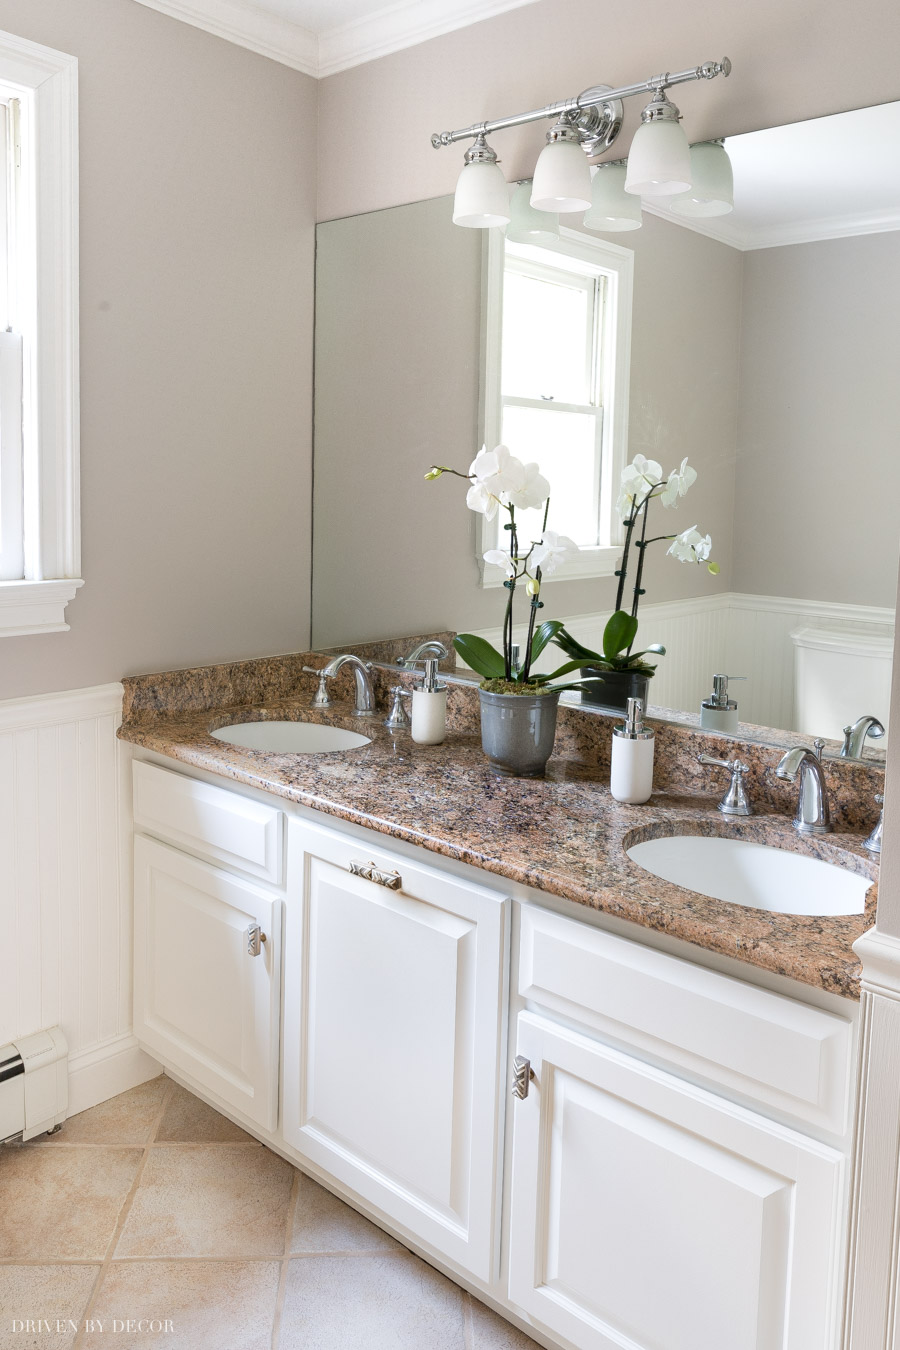 Our Painted Bathroom Vanity: The "Before" & "After" and How-to Guide! -  Driven by Decor